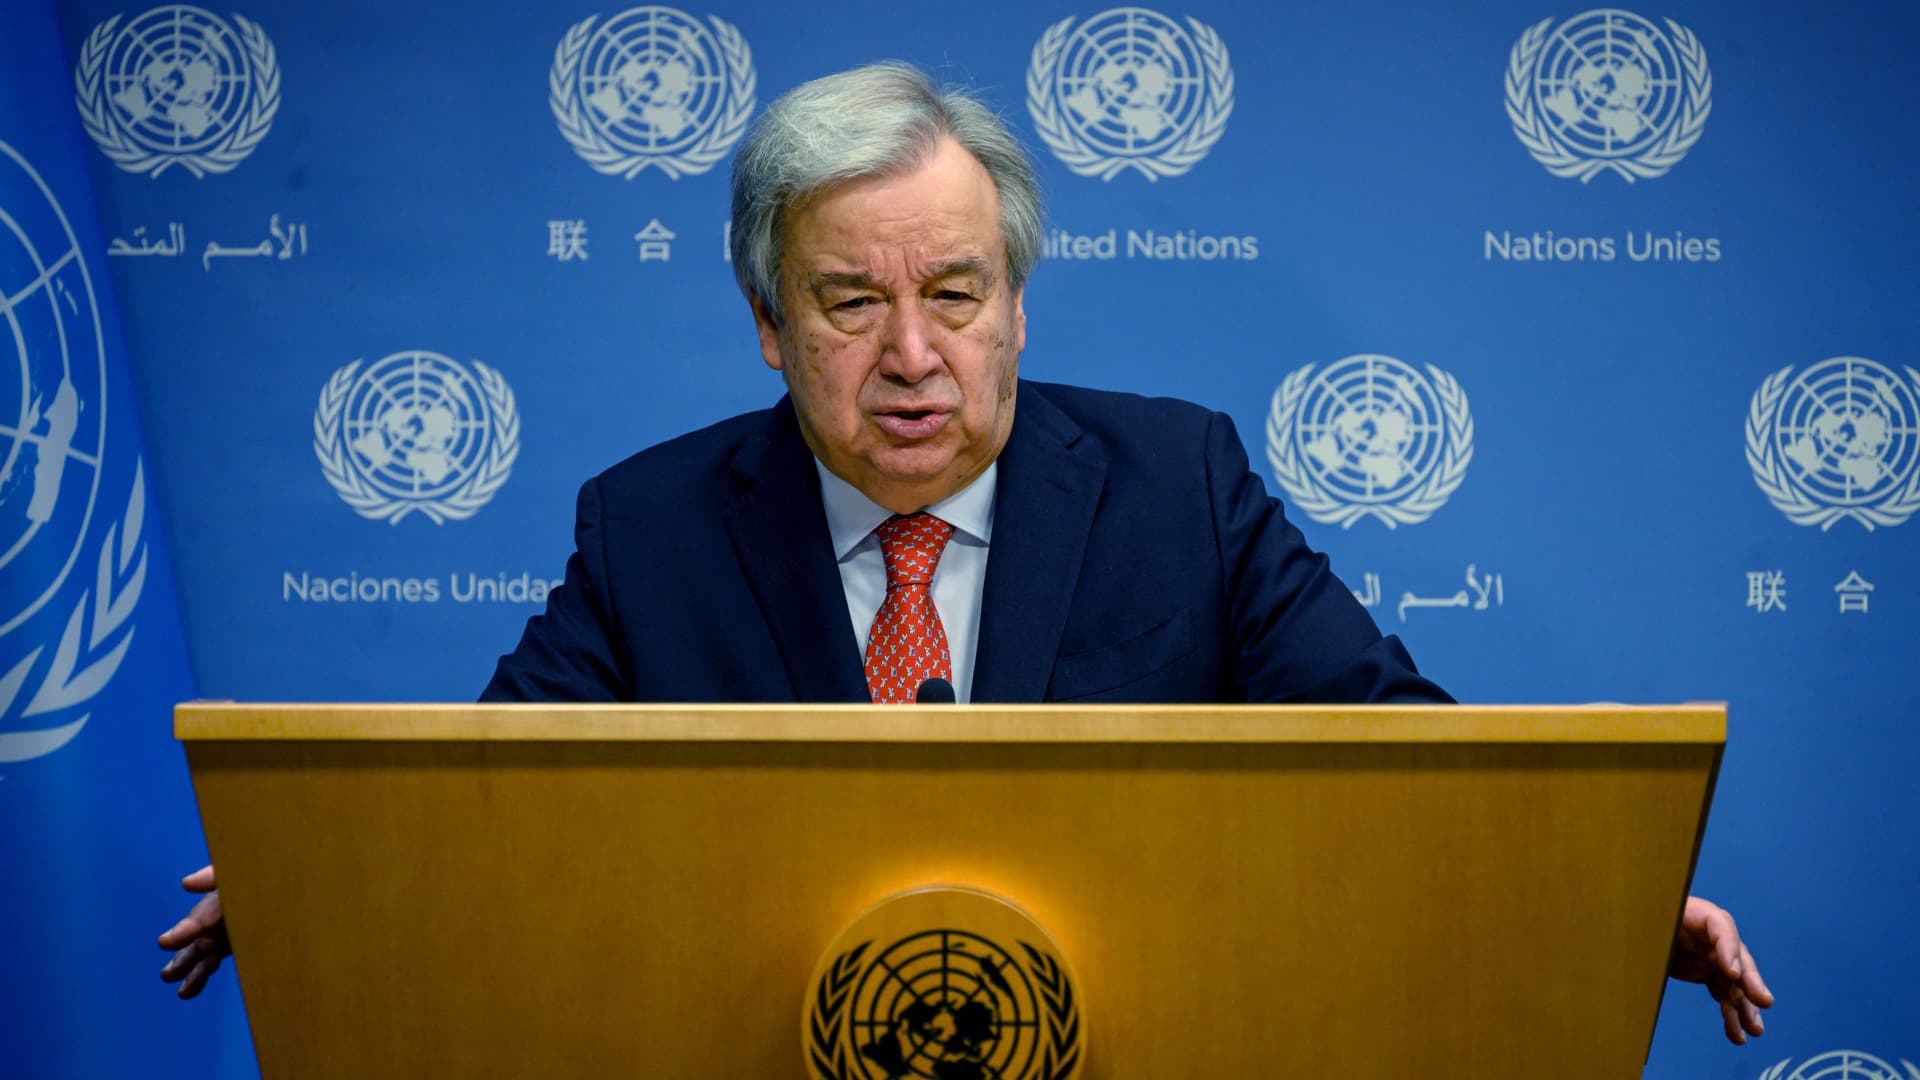 U.S. Secretary-General Antonio Guterres speaks about climate change at the U.N. headquarters in New York City on July 27, 2023.